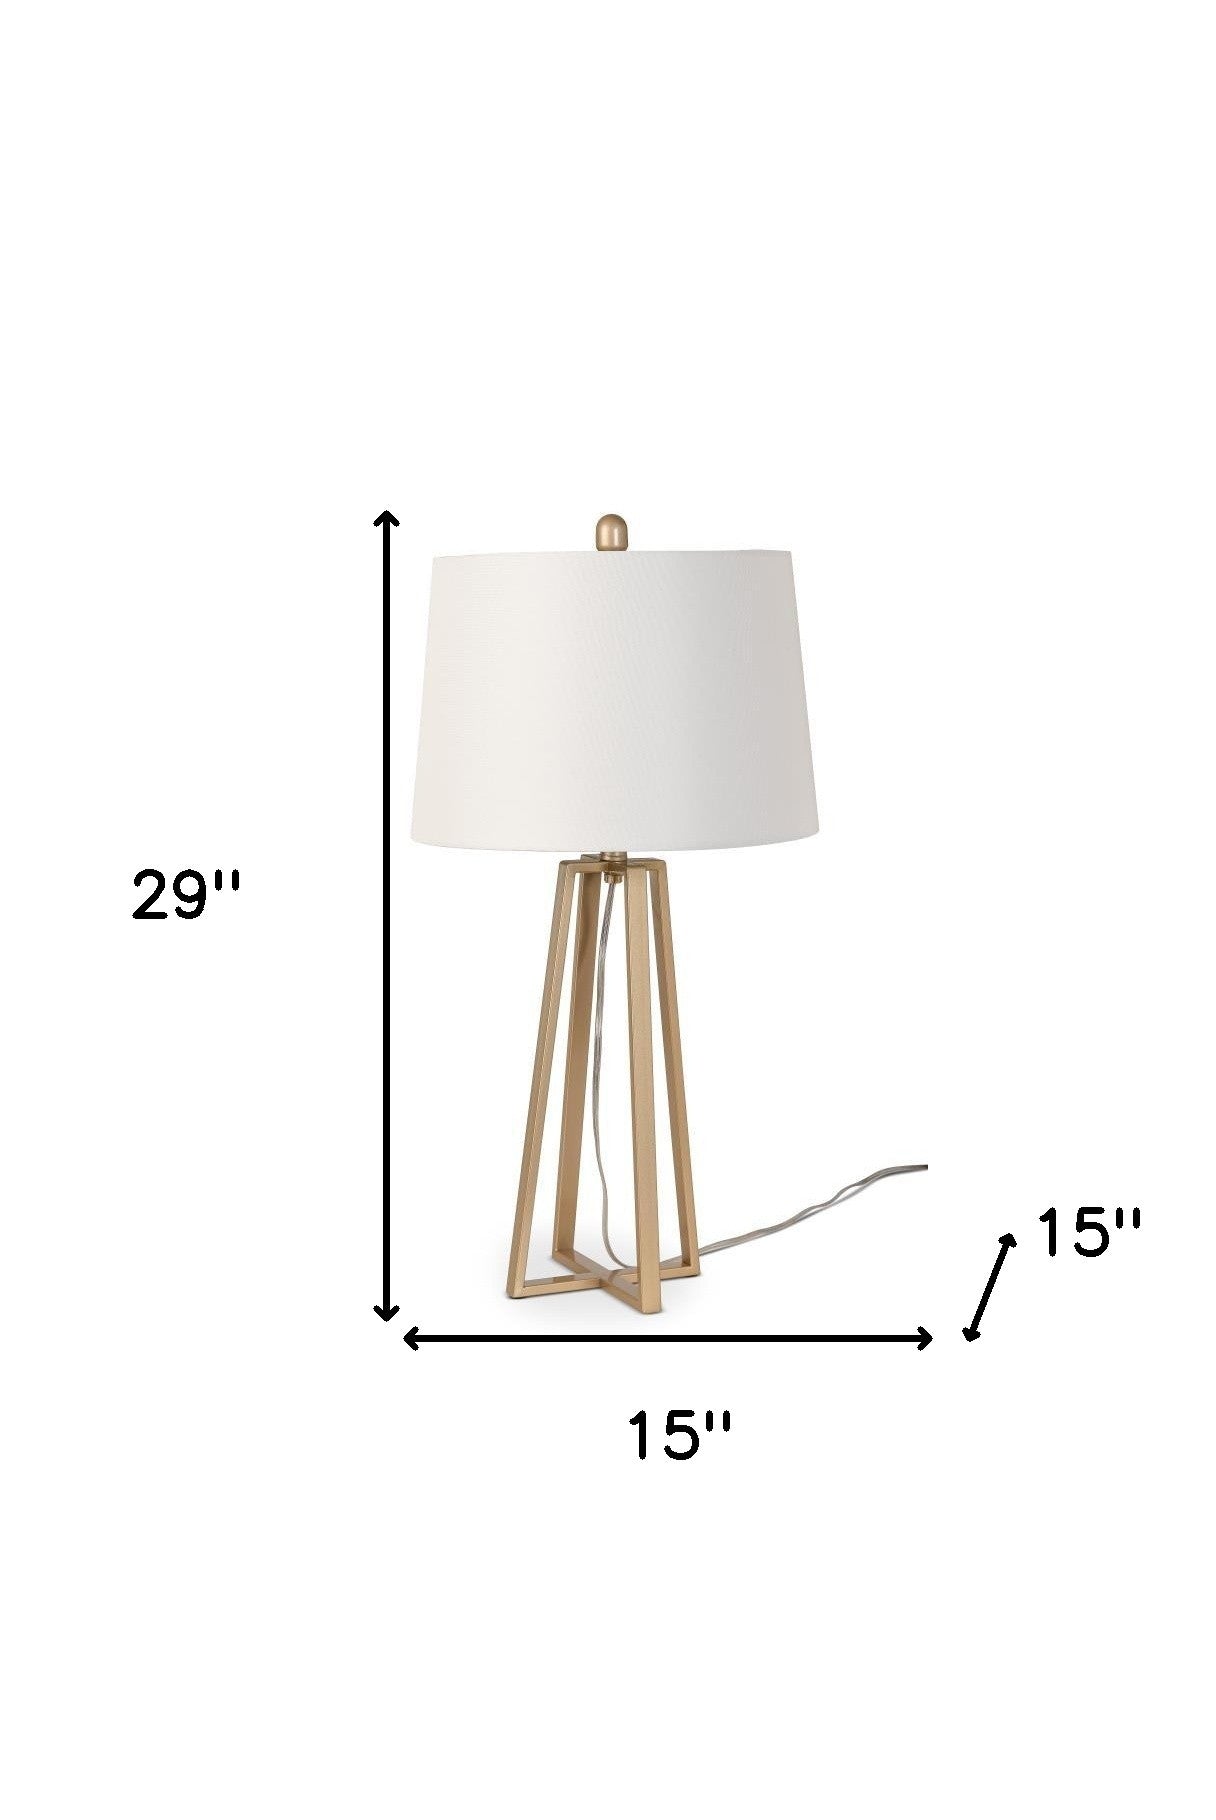 Set of Two 29" Gold Metal Geometric Table Lamps With White Drum Shade